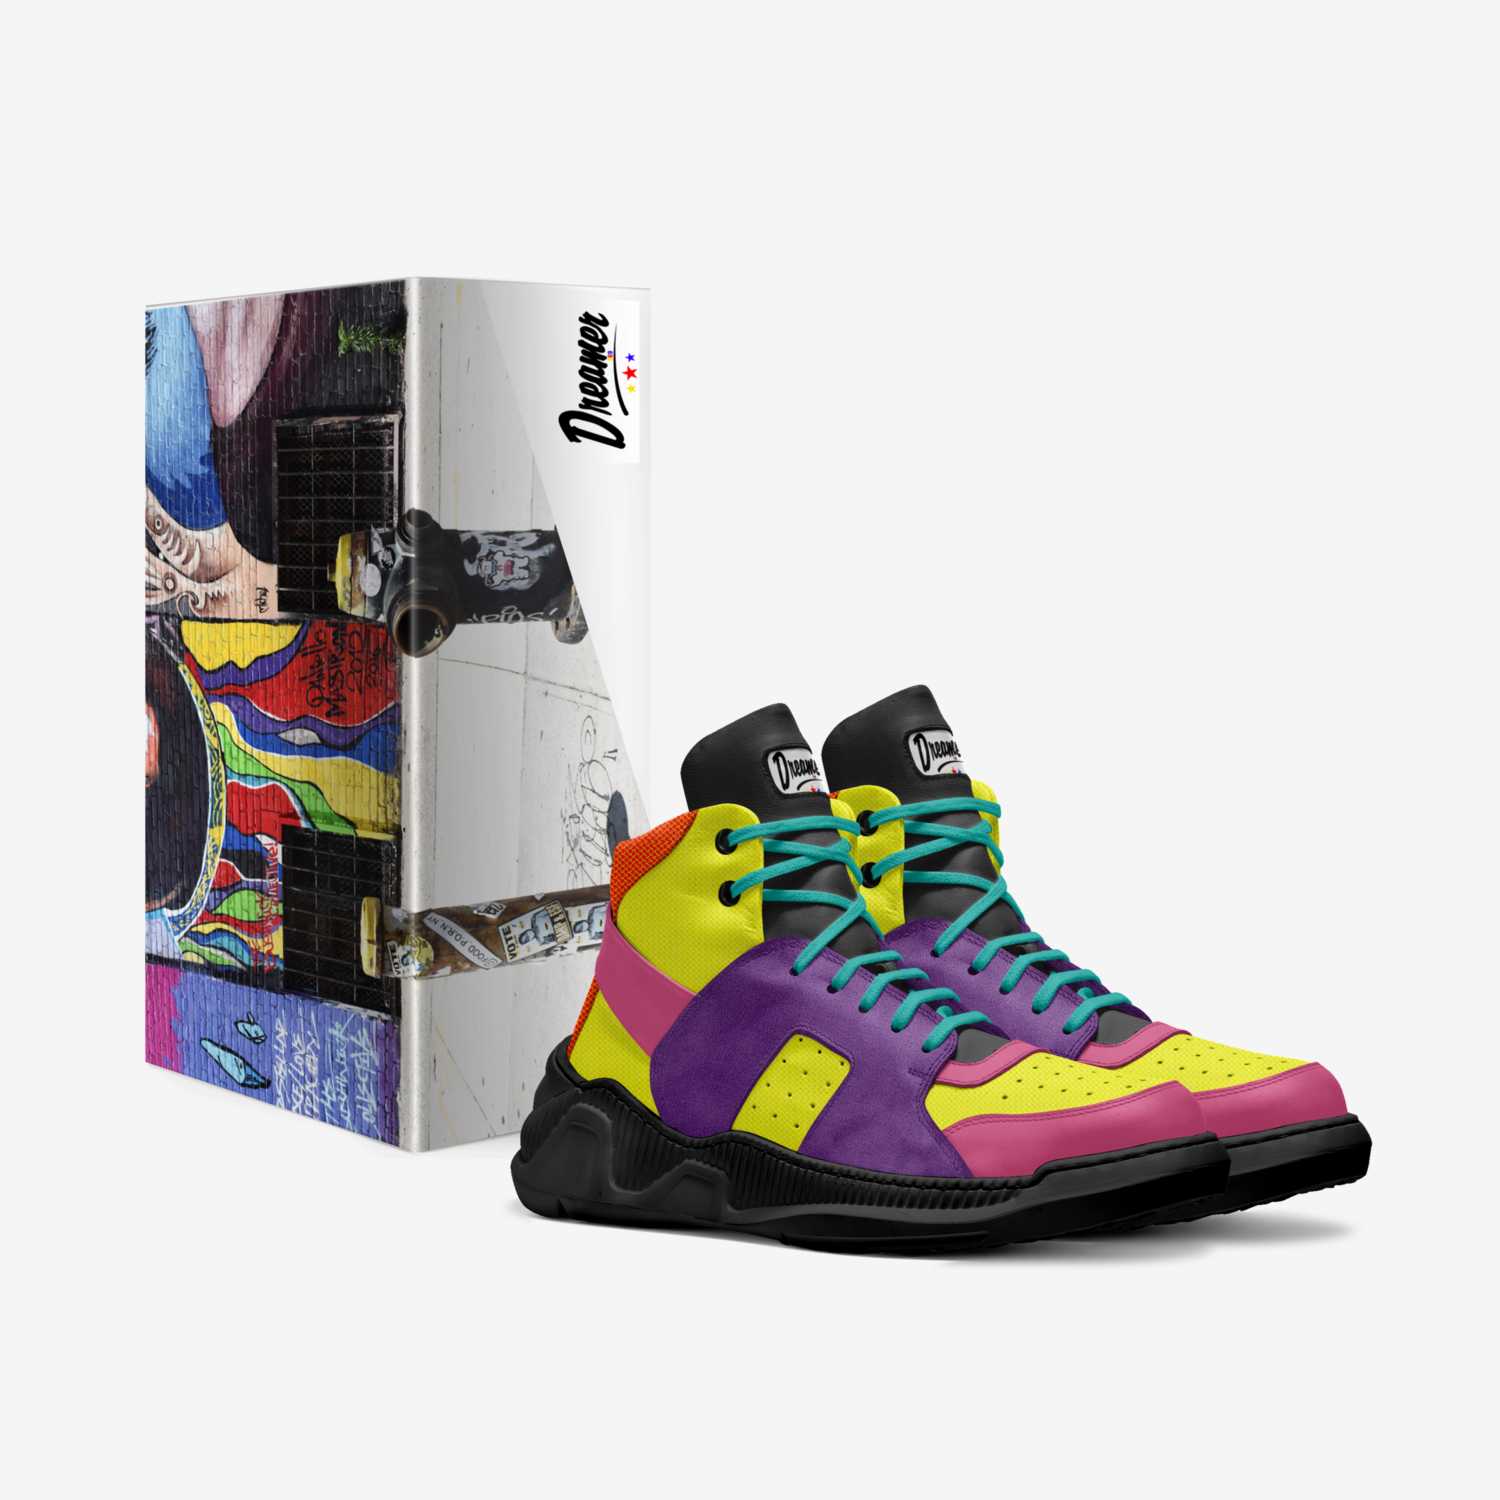 Dreamer Rainbows custom made in Italy shoes by William Trice | Box view